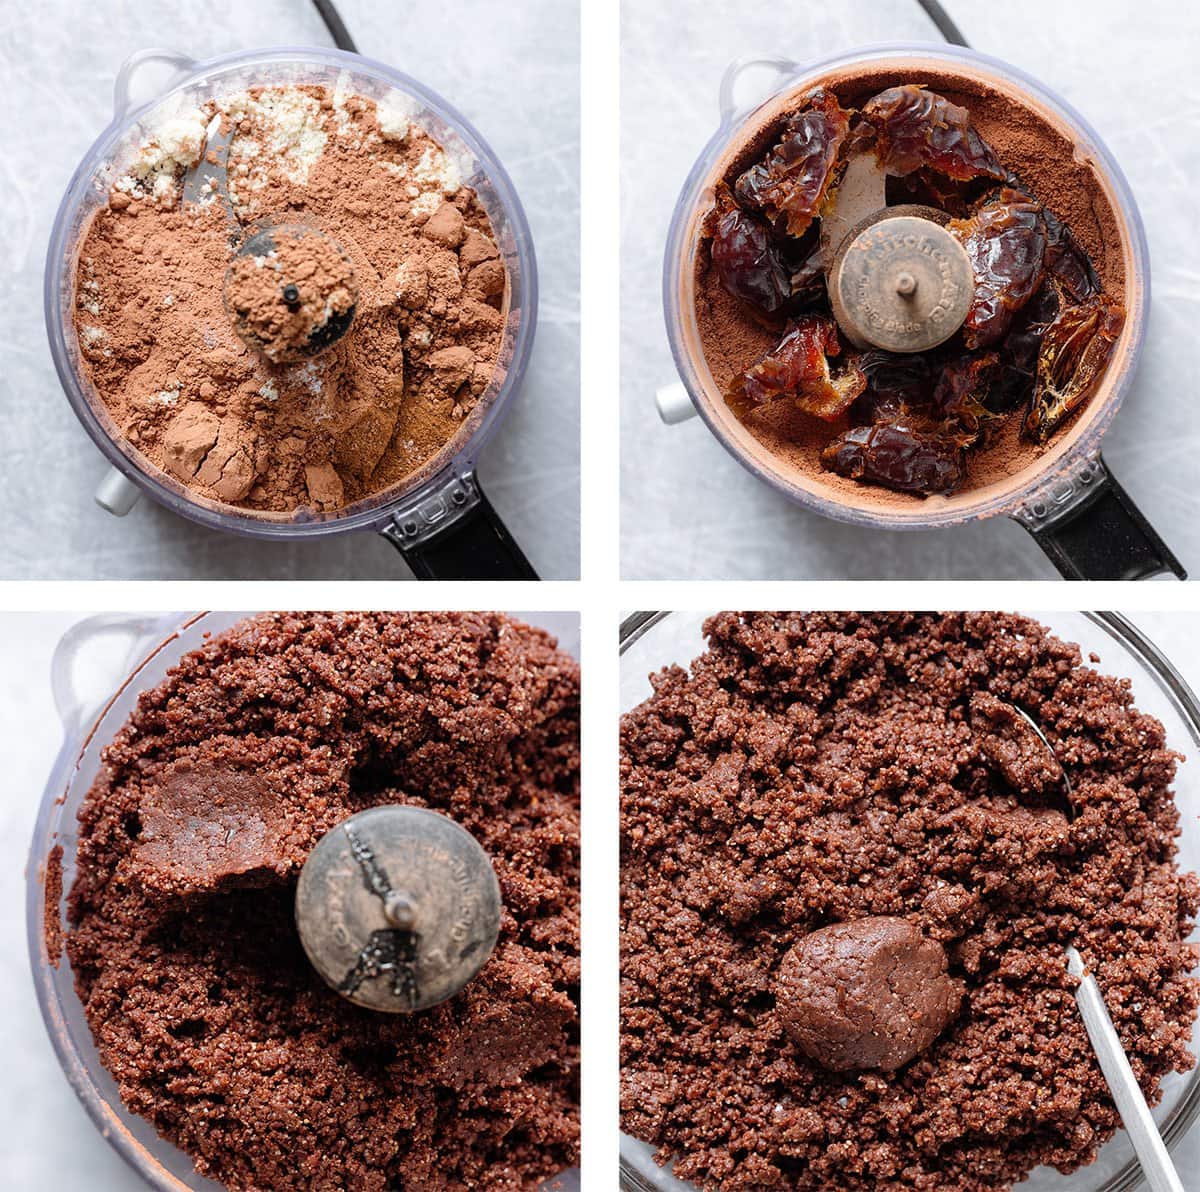 Four photos showing how to make cookie dough in a food processor from dry ingrediens to adding dates and nut butter.